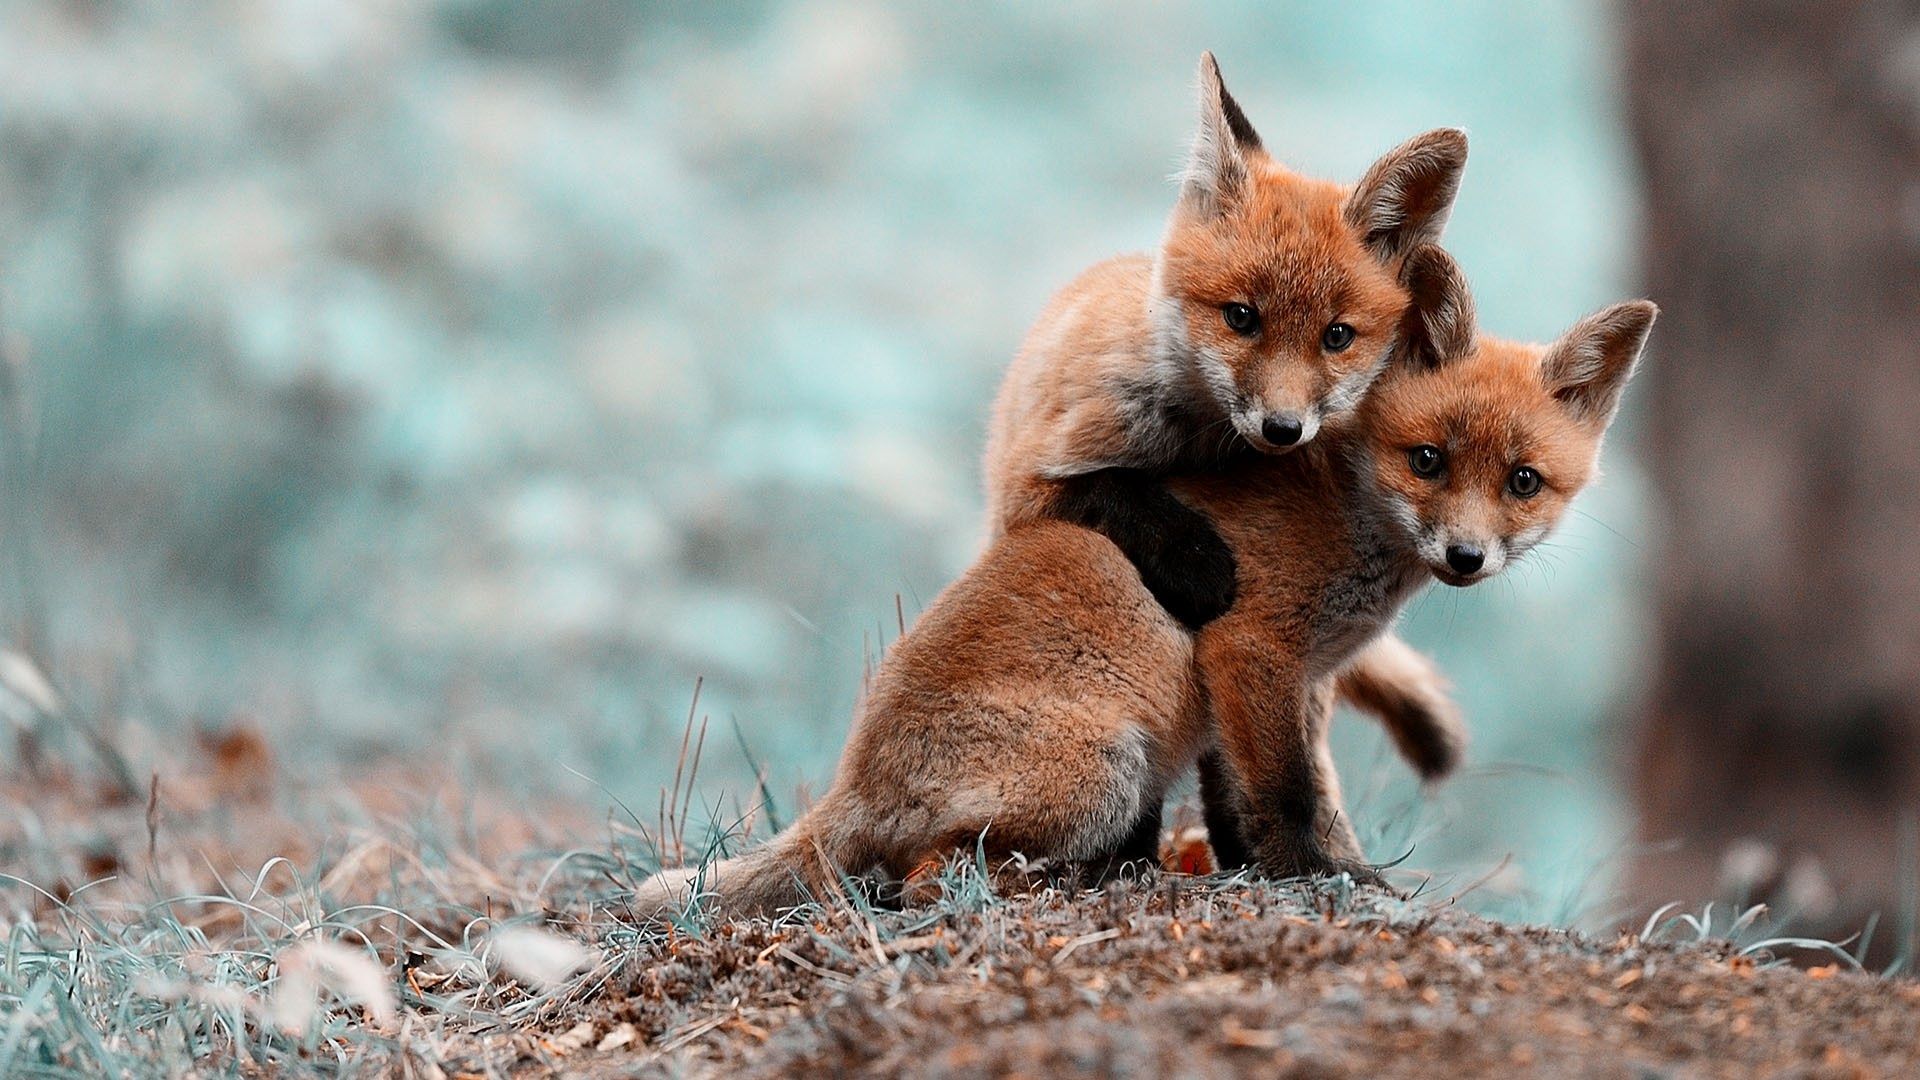 Fox Wallpapers High Quality Pictures of Fox in Stunning Foxes